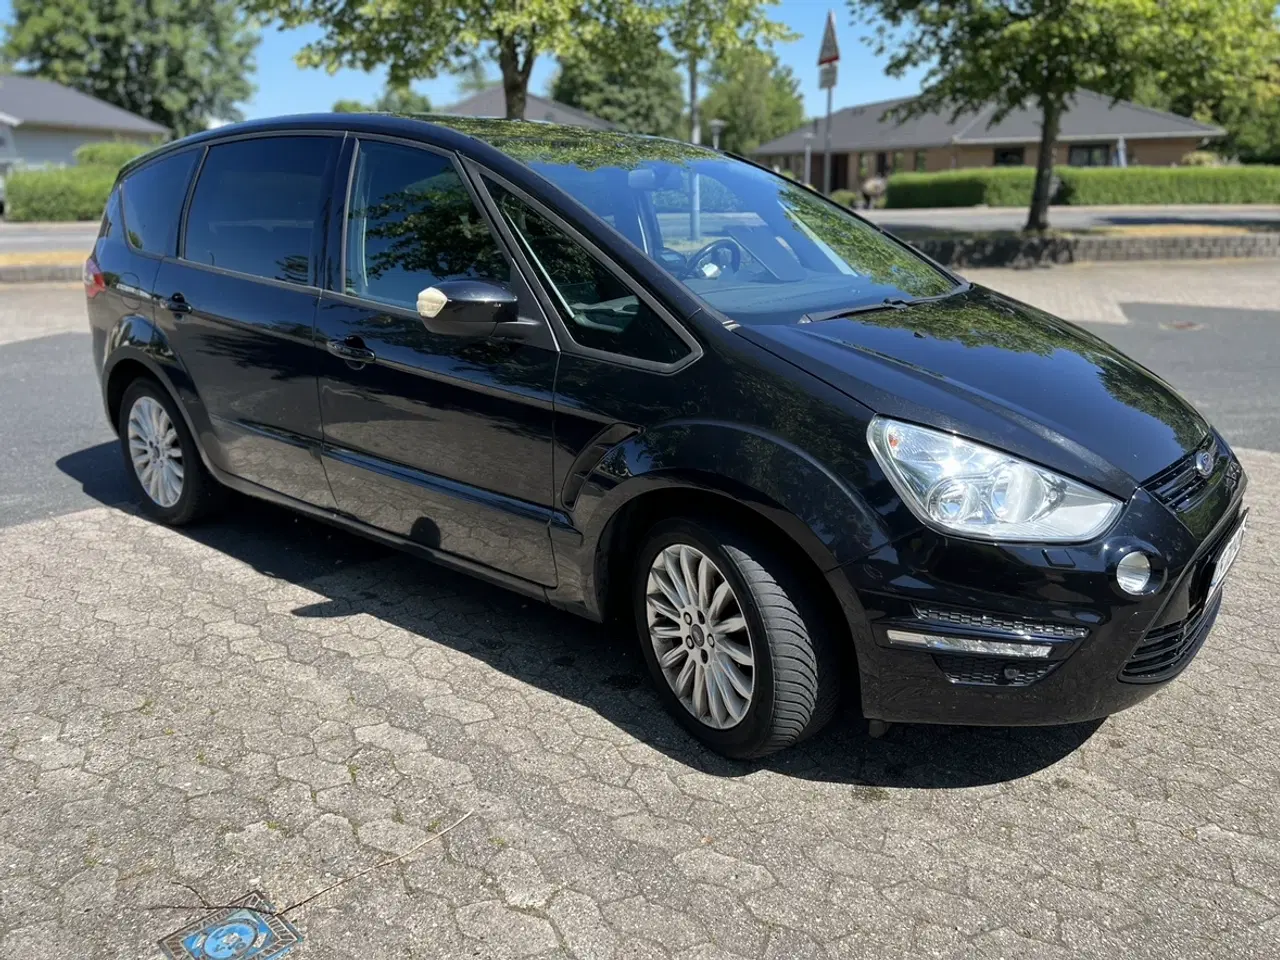 Billede 1 - Ford S Max 5 Pers. 